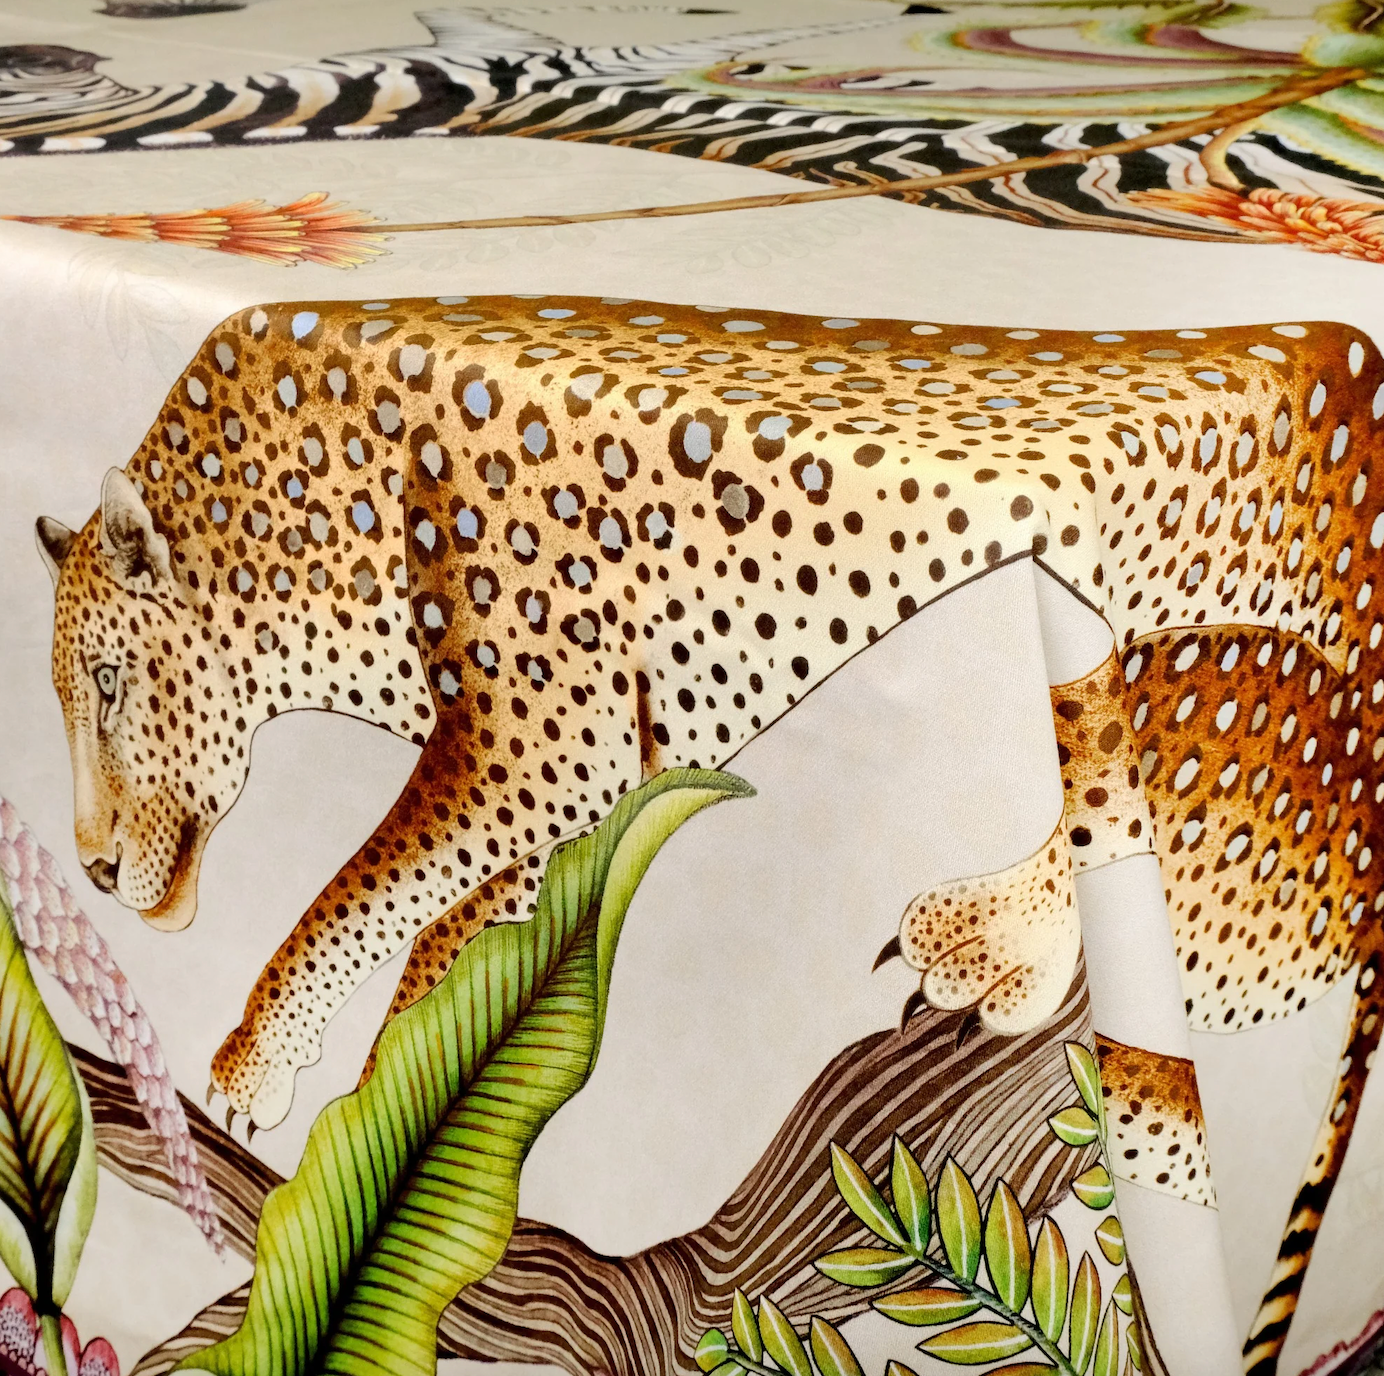 Ardmore Pangolin Stripe cotton tablecloth from South Africa